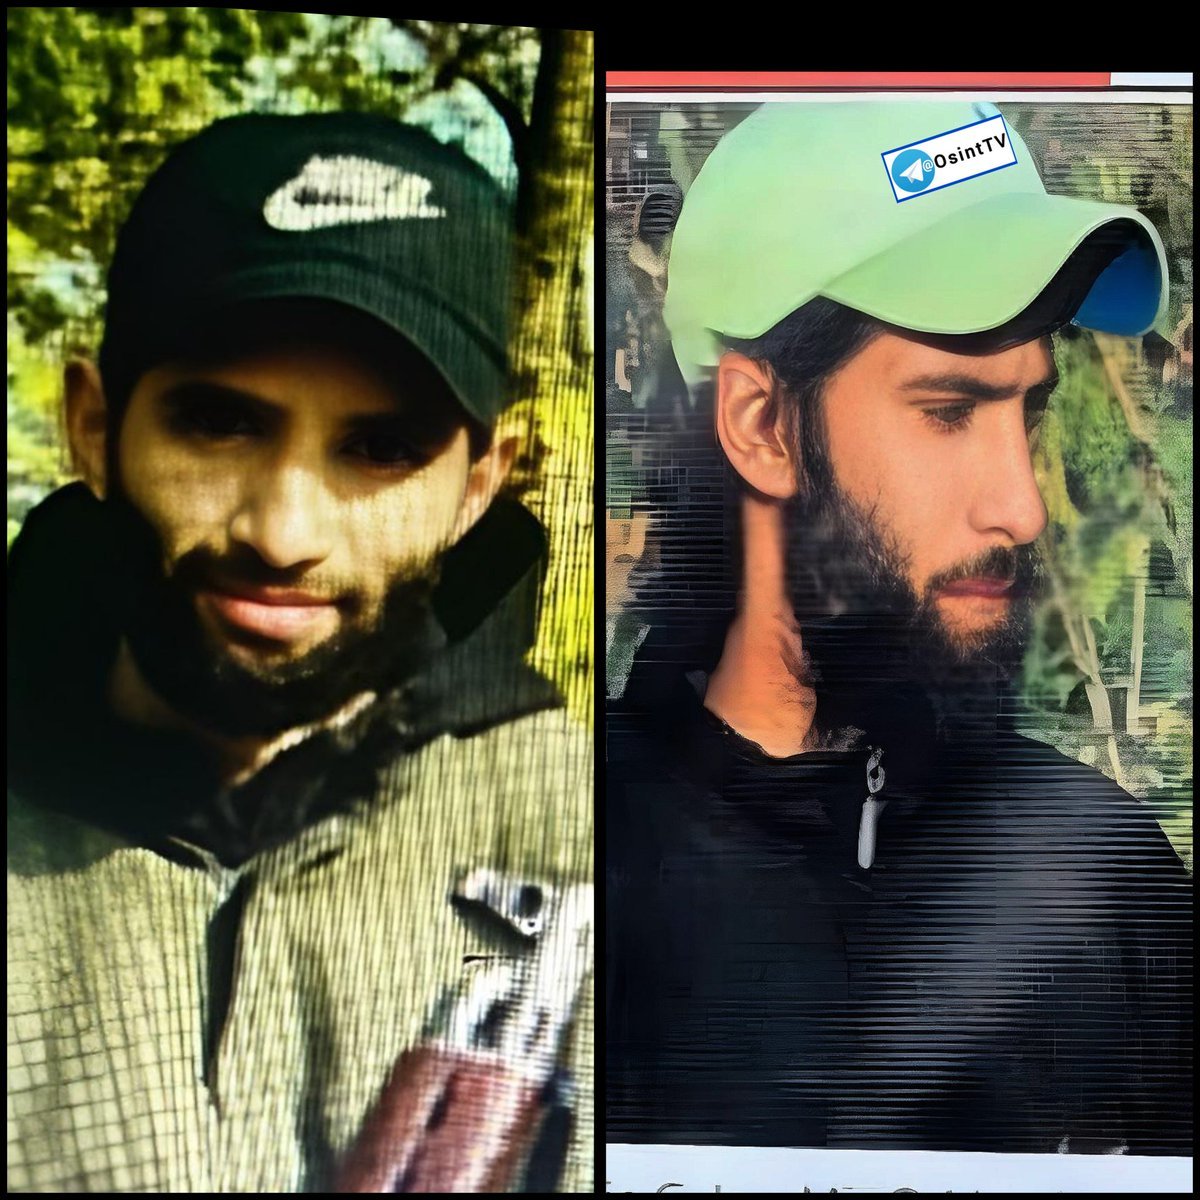 🚨 Breaking Massive success to Indian forces The 3rd terrorist identified as Momin Gulzar by agencies. Momin Gulzar Amir is the TRF (LeT) commander central - Kashmir and he is considered as HVT by agencies